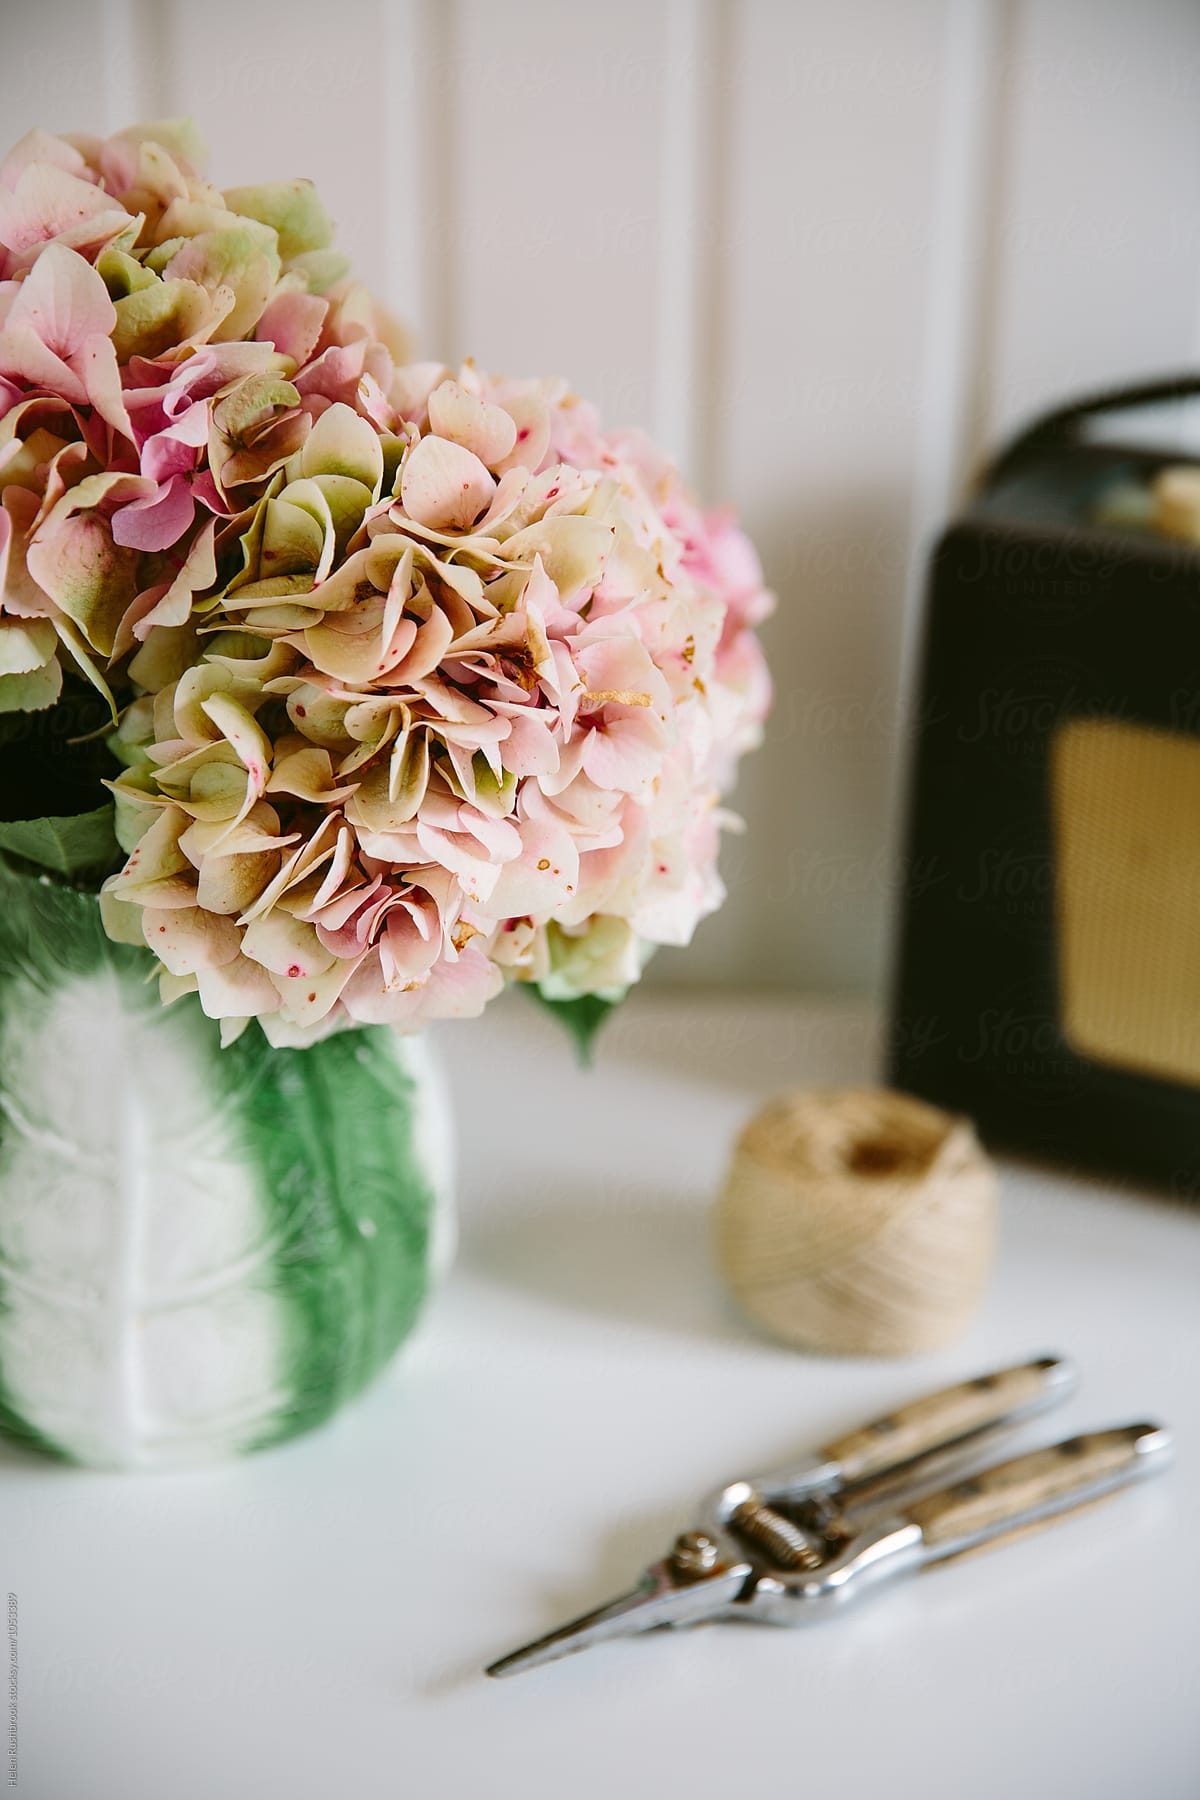 Still life vignette featuring faded pink hydrangea blooms in a vintage jug.